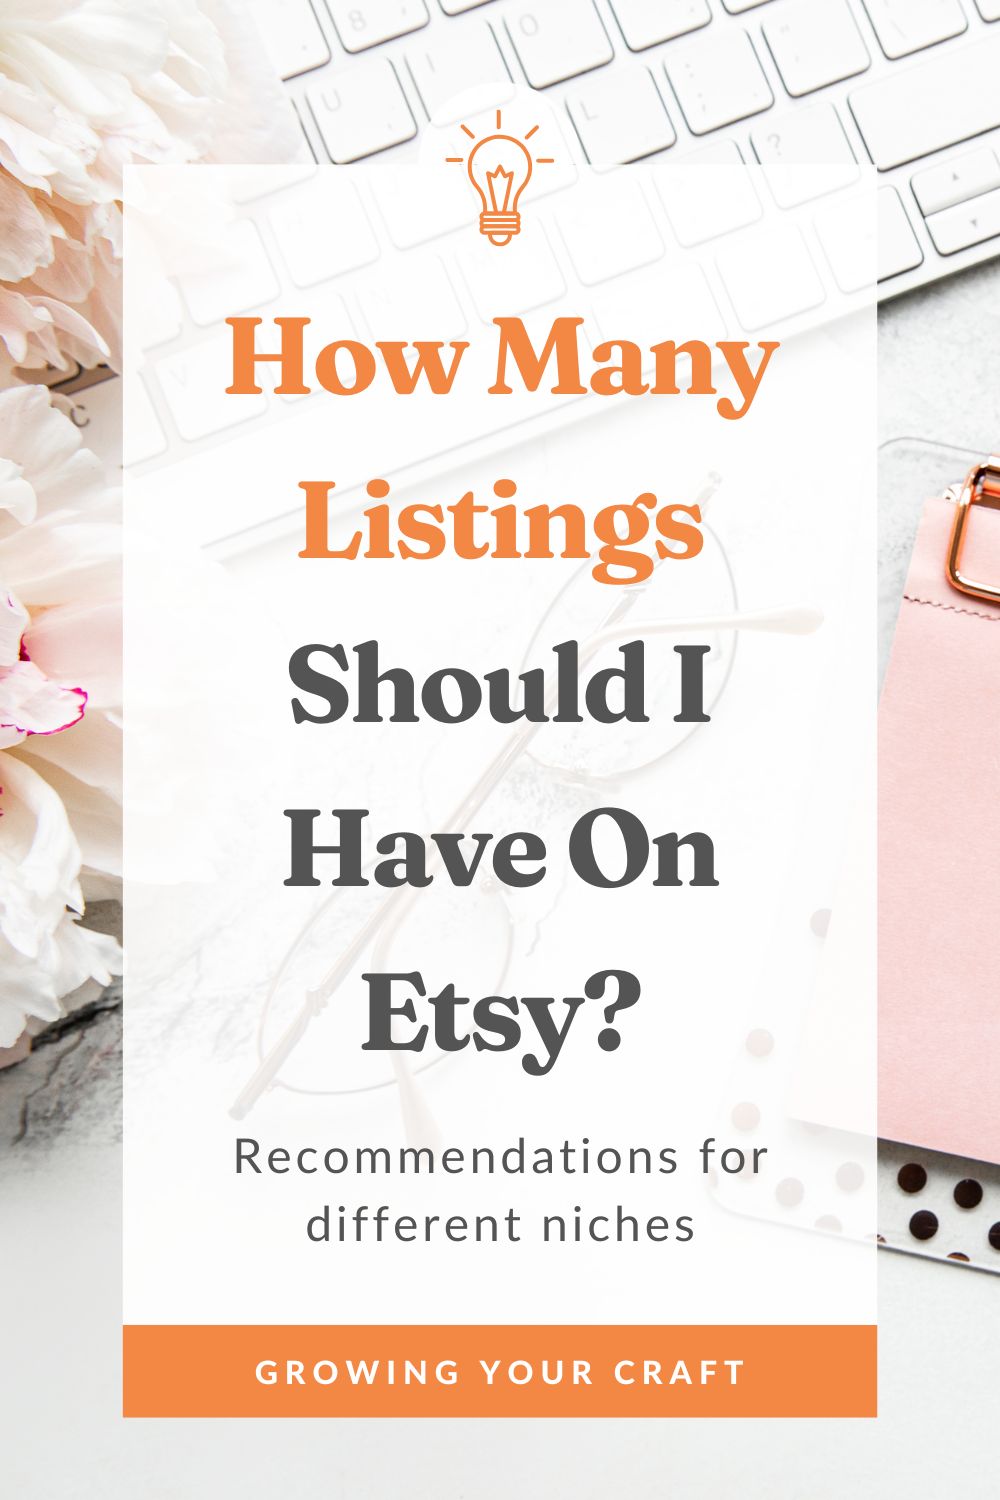 How Many Listings Should I Have On Etsy?